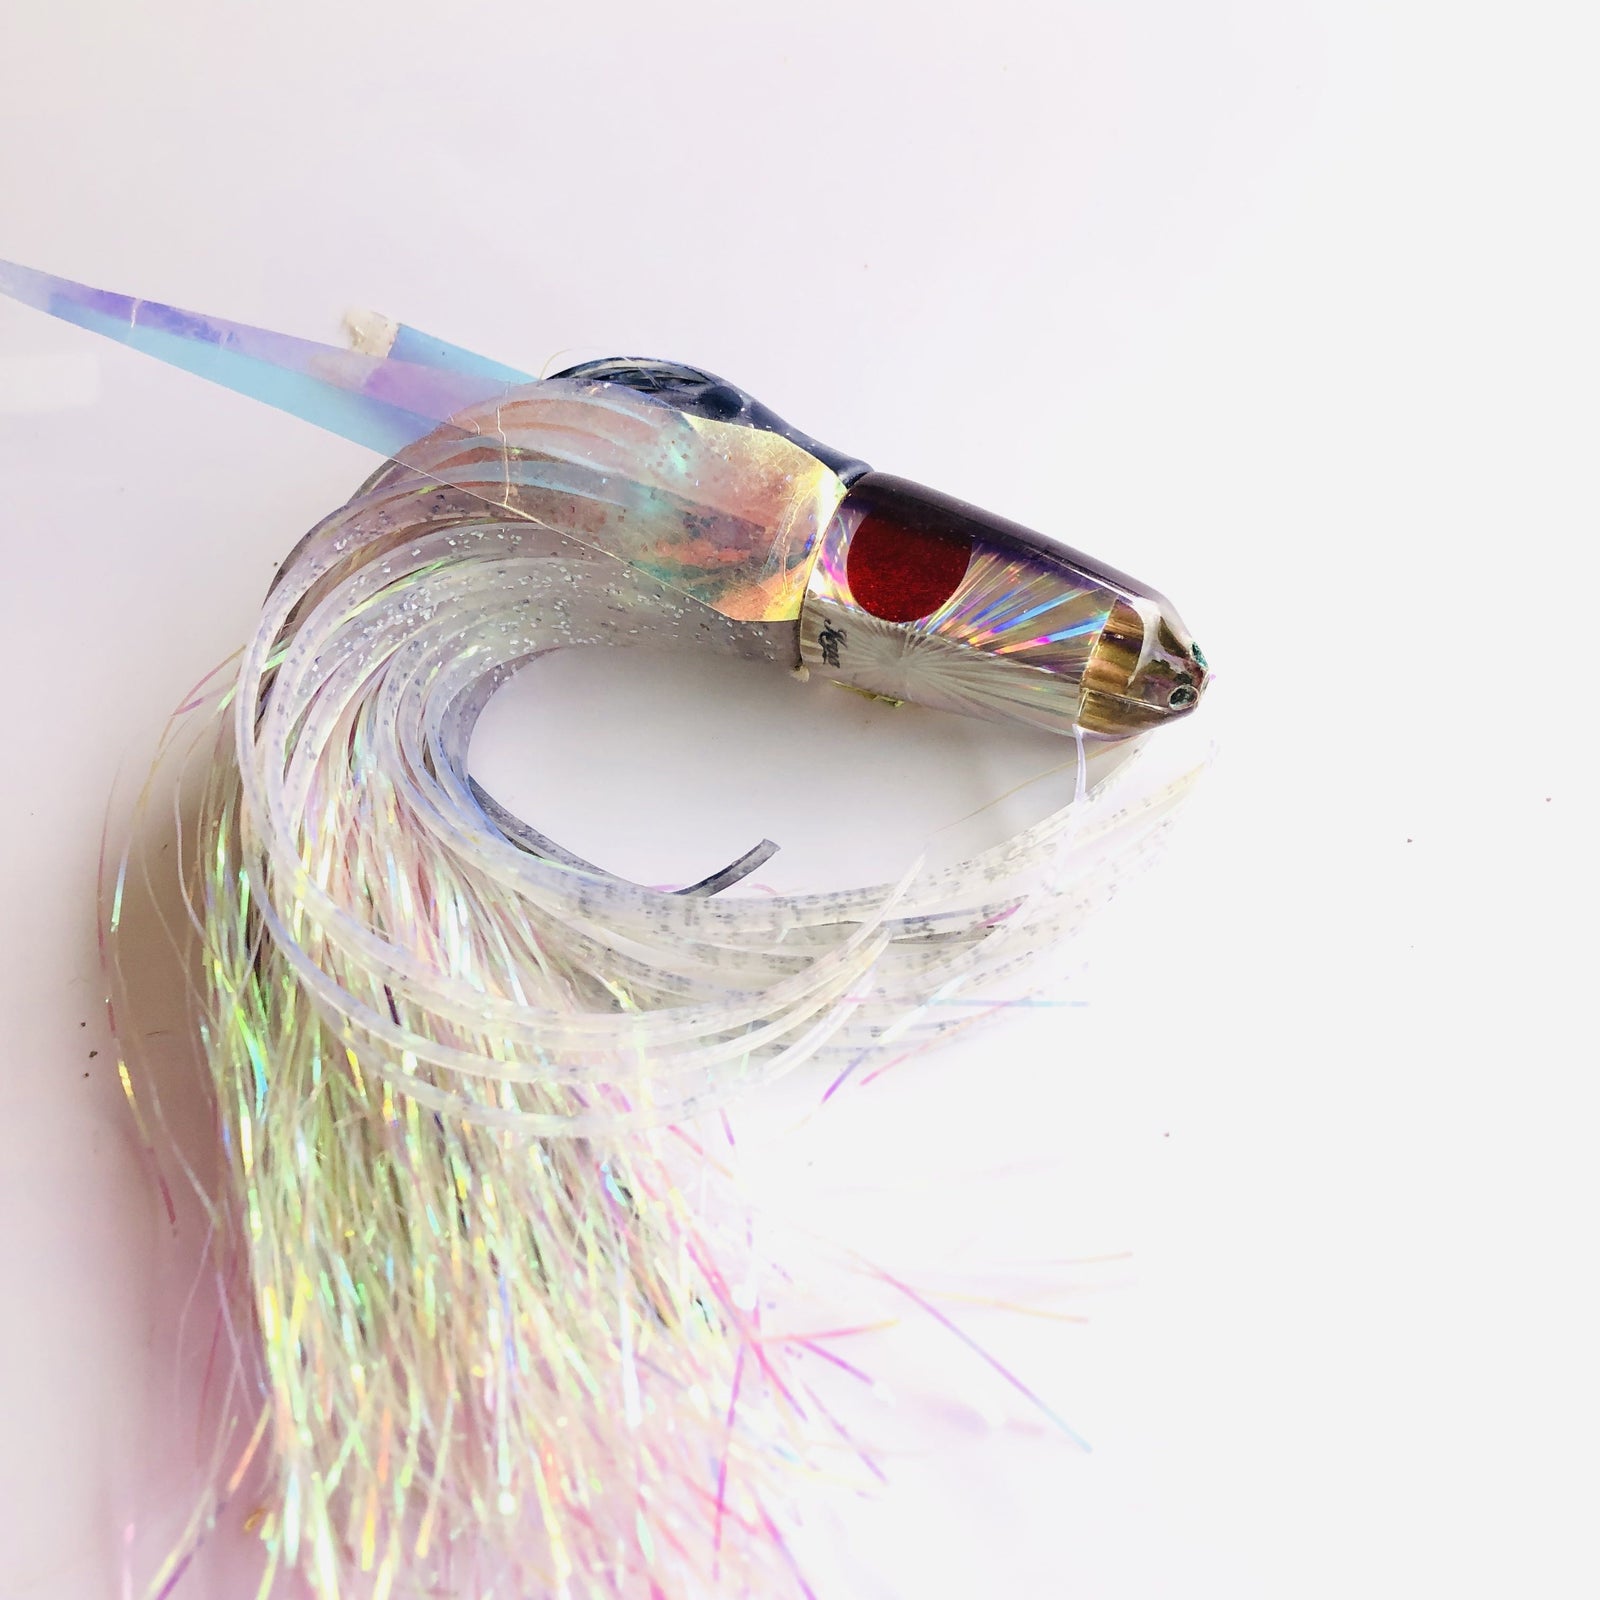 Flashabou -In Stock Now. Shop all New and Used Saltwater Tackle